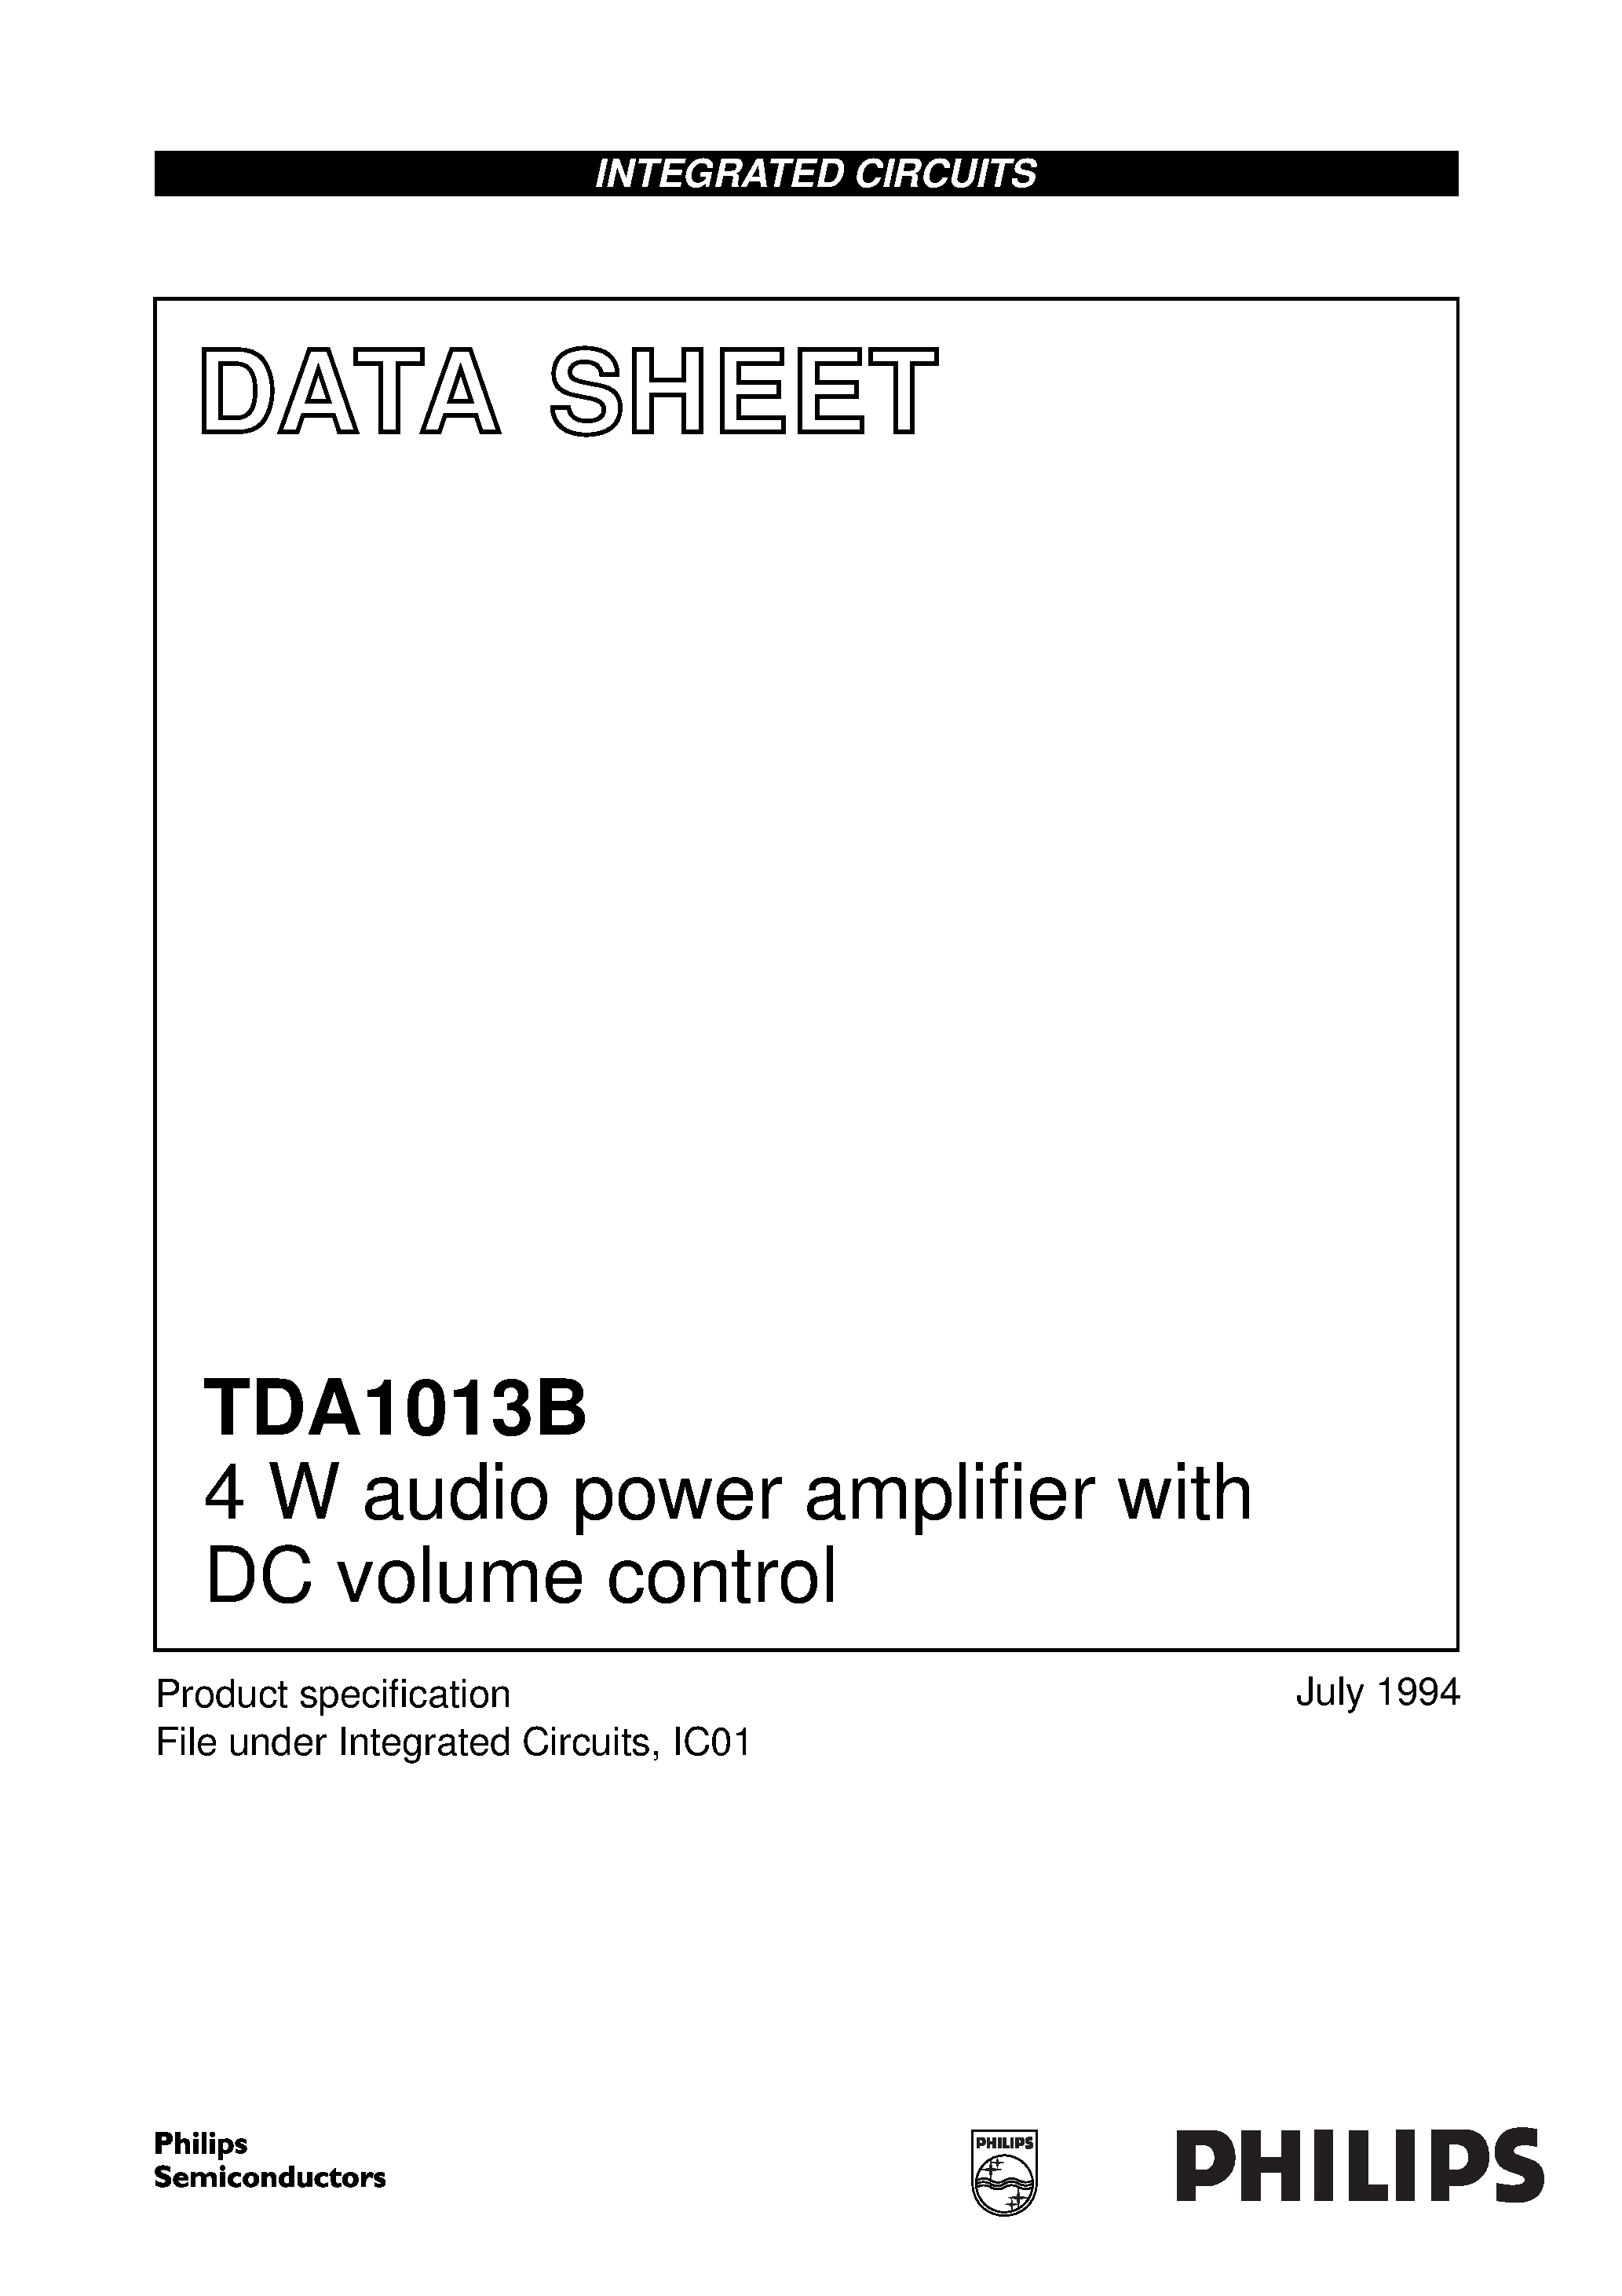 Datasheet TDA1013B - 4 W audio power amplifier with DC volume control page 1